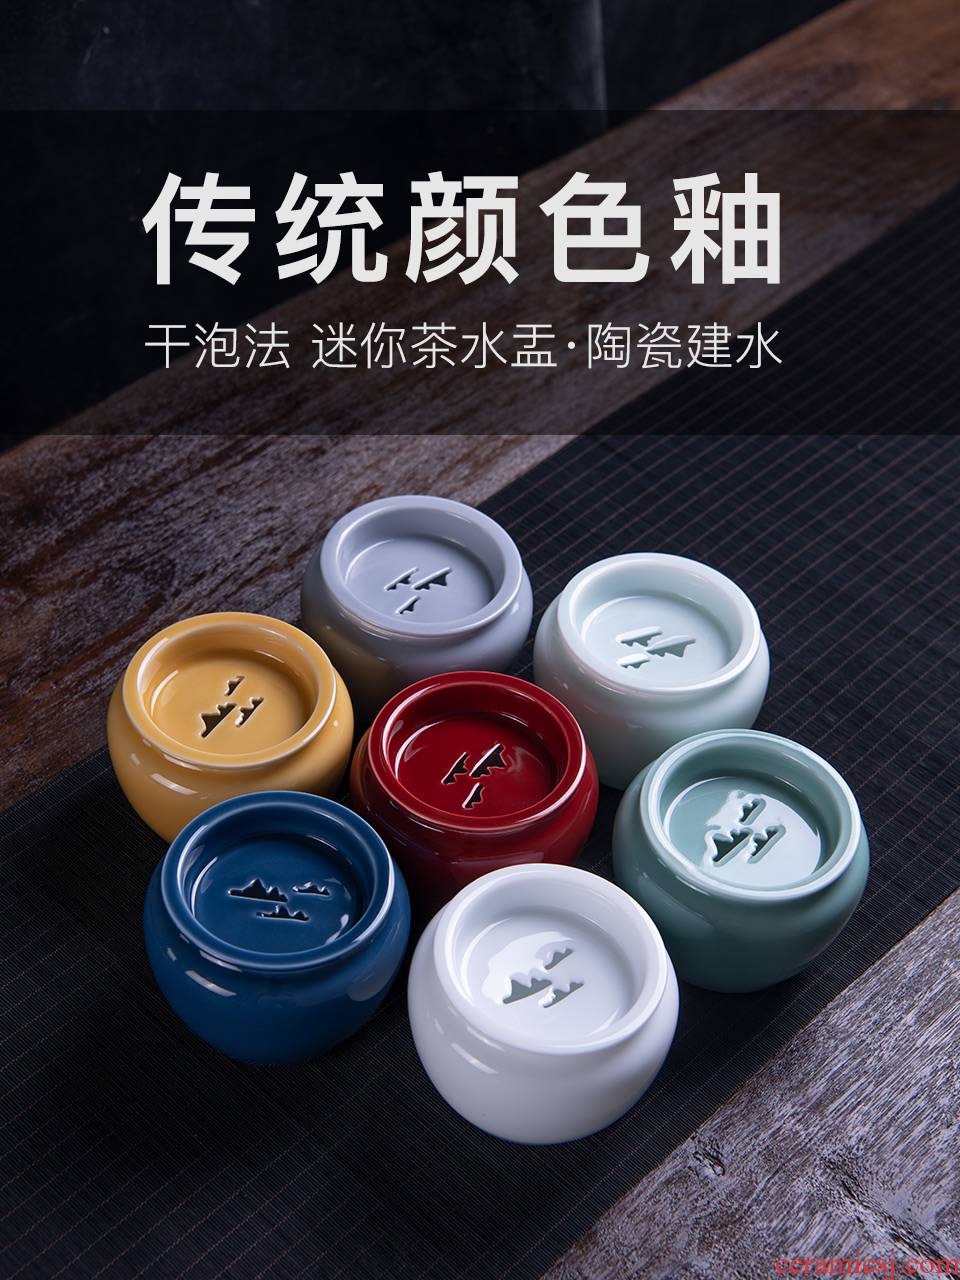 Wynn collect Japanese kung fu tea tea accessories for wash water jar to build small cup of water to wash with cover of jingdezhen ceramics